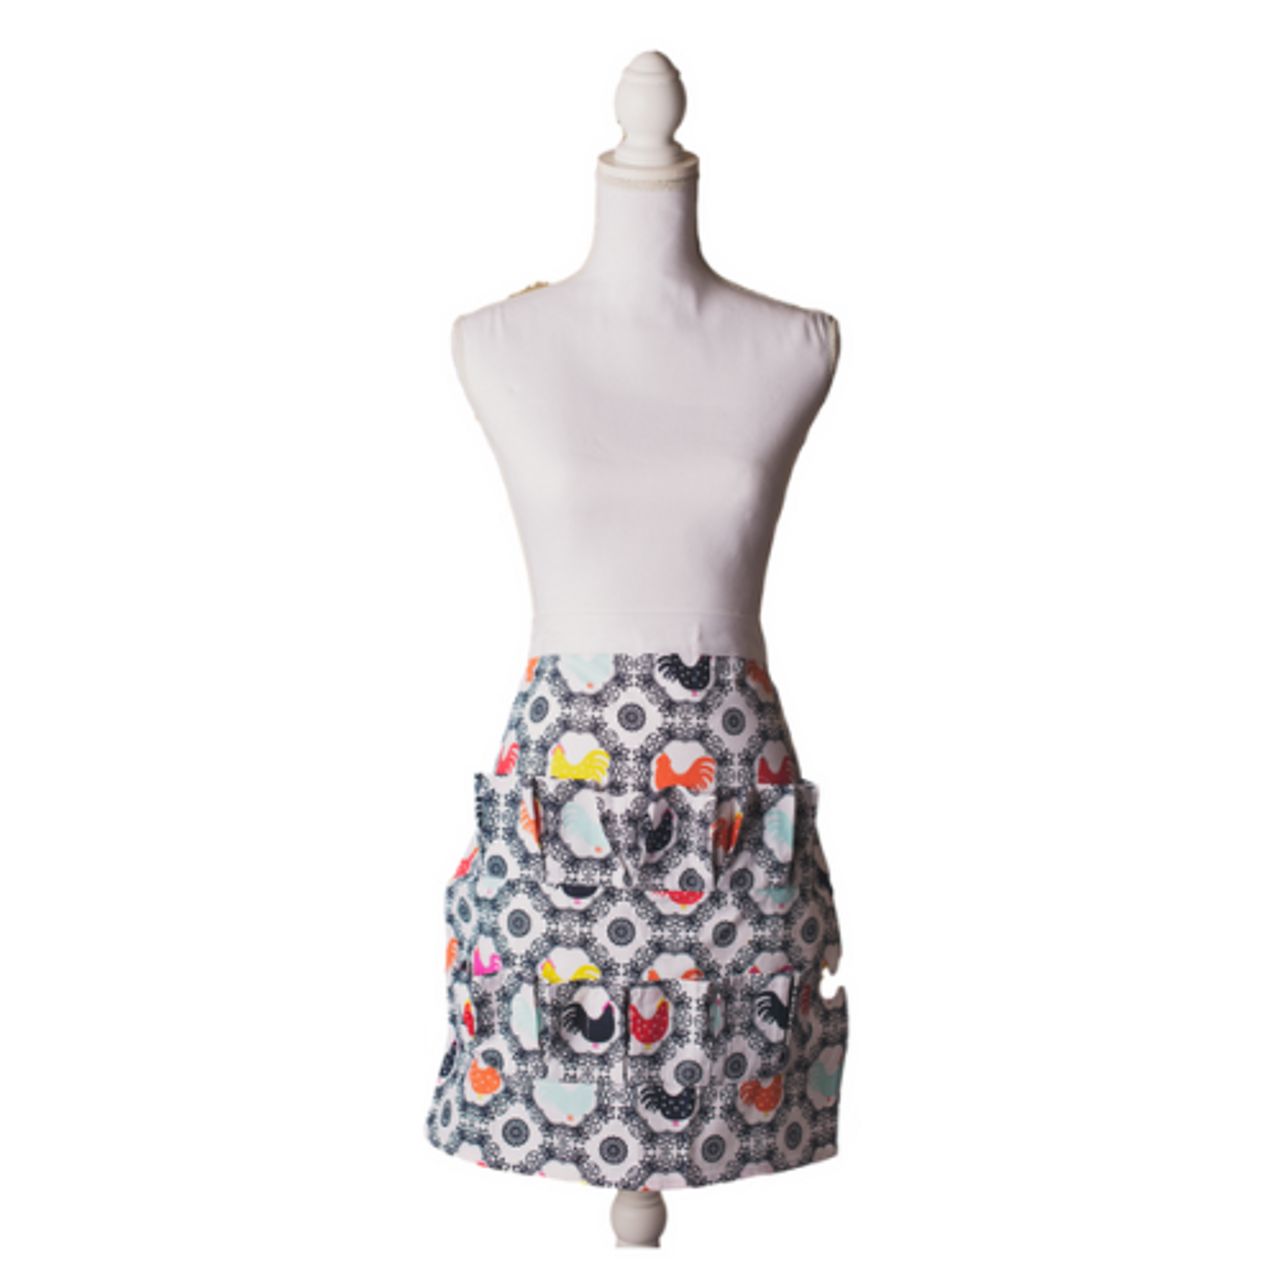 Egg Collecting Apron Half Body Adult, Roosters Roses